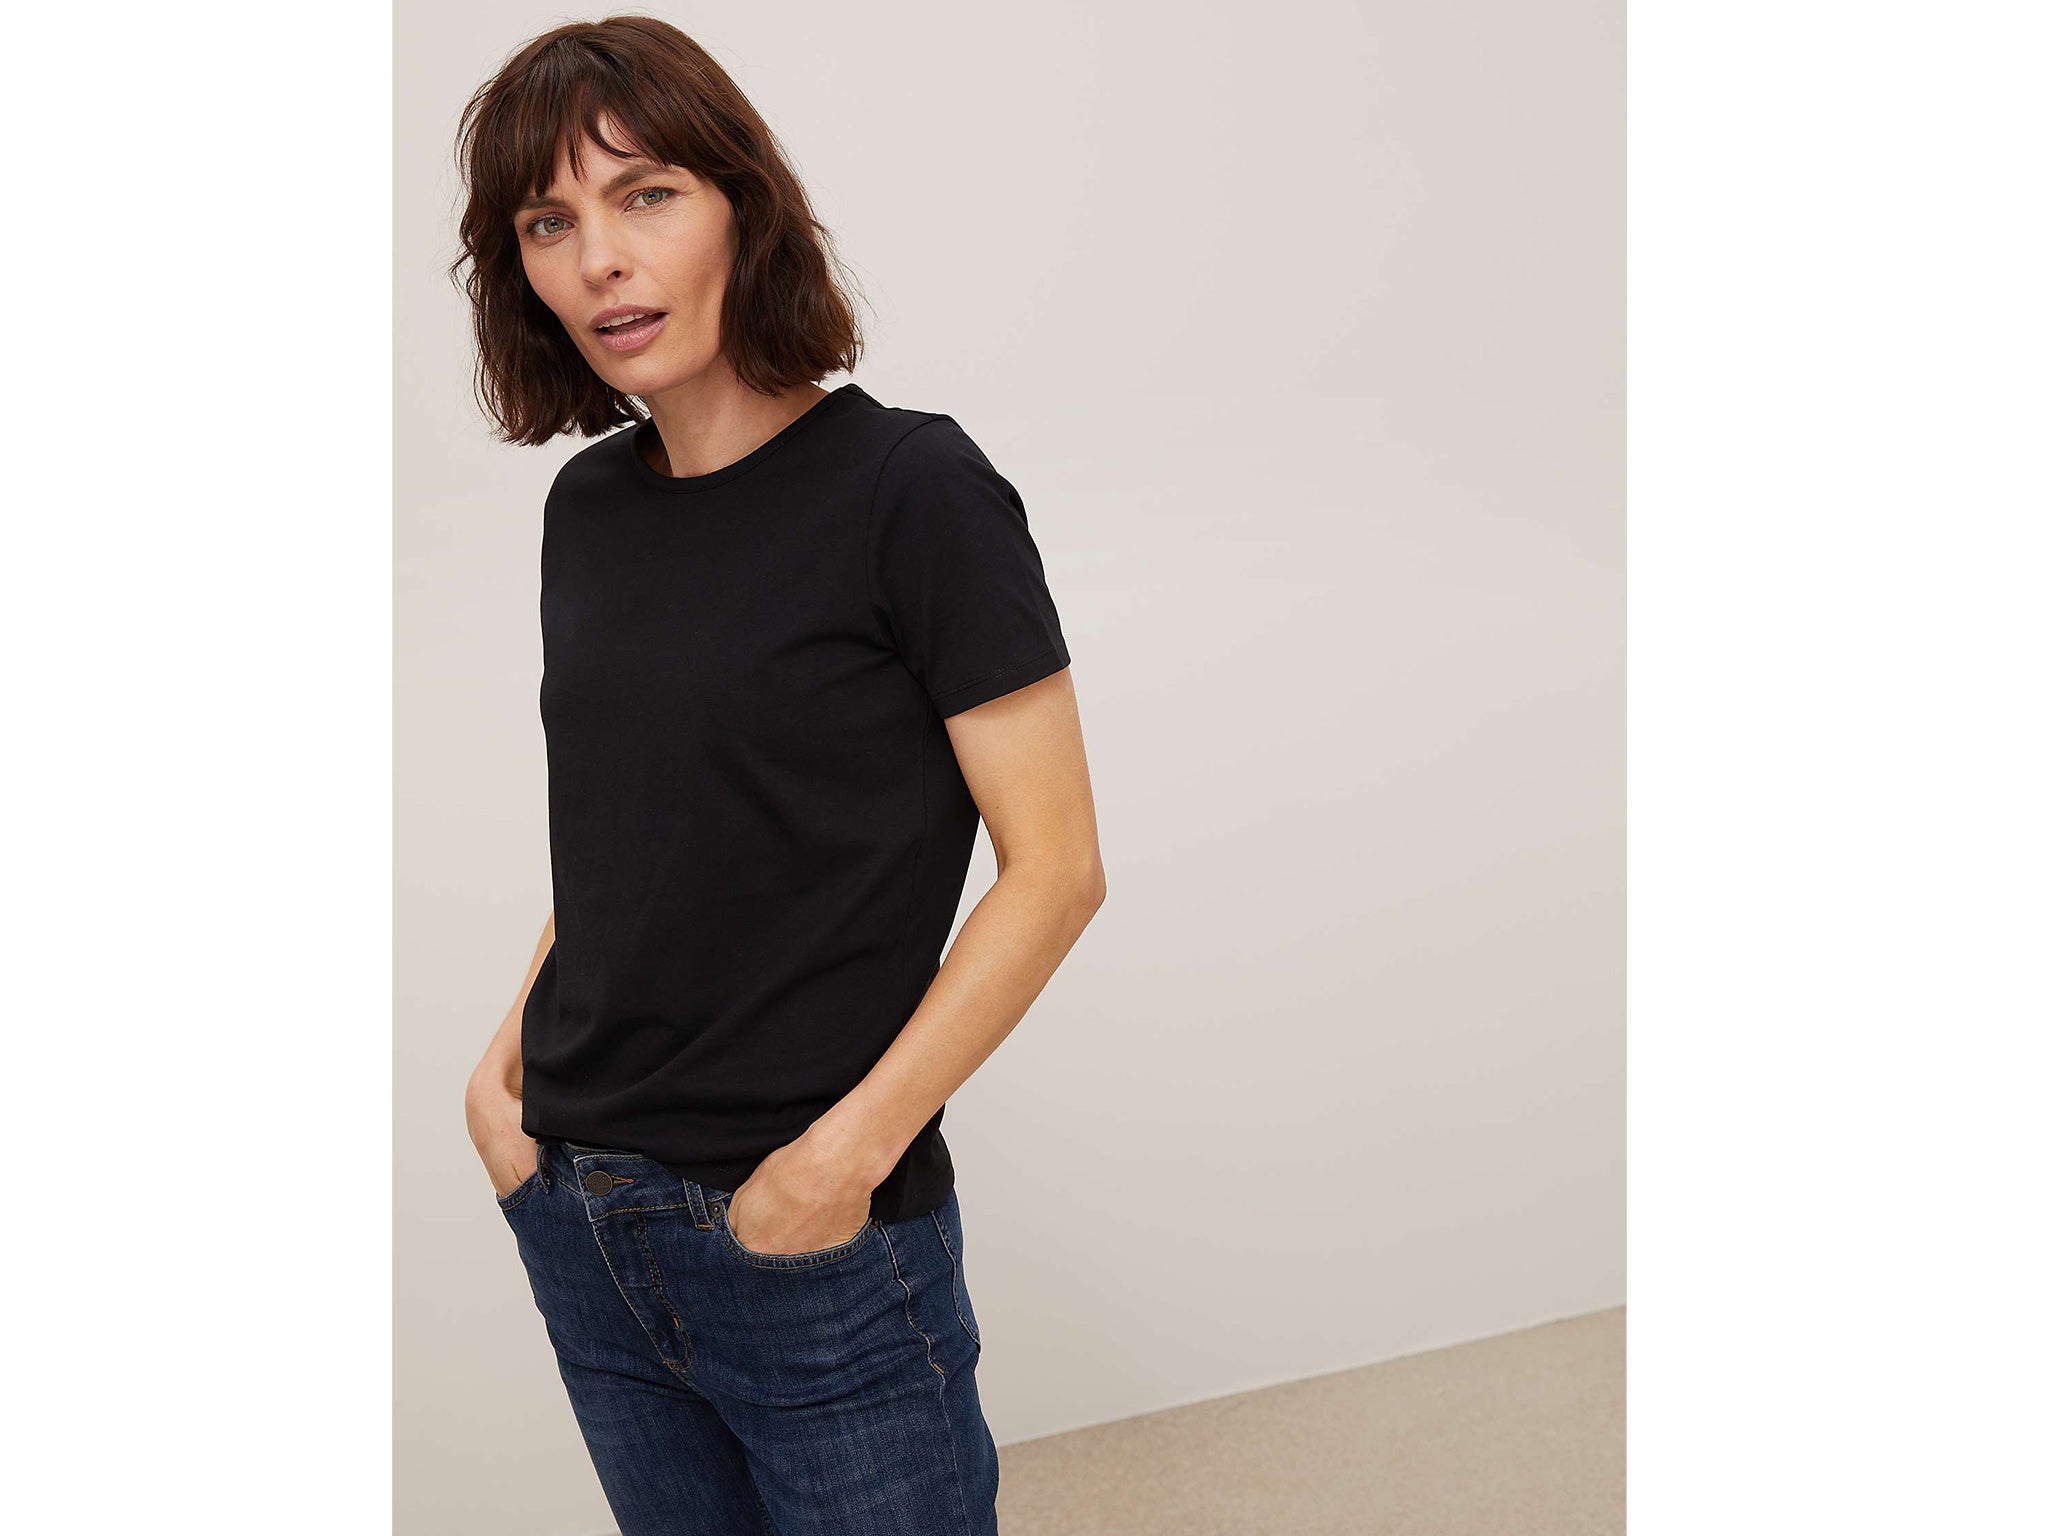 Todos Disipar Muelle del puente The ultimate basic T-shirt is this £7 John Lewis tee | The Independent